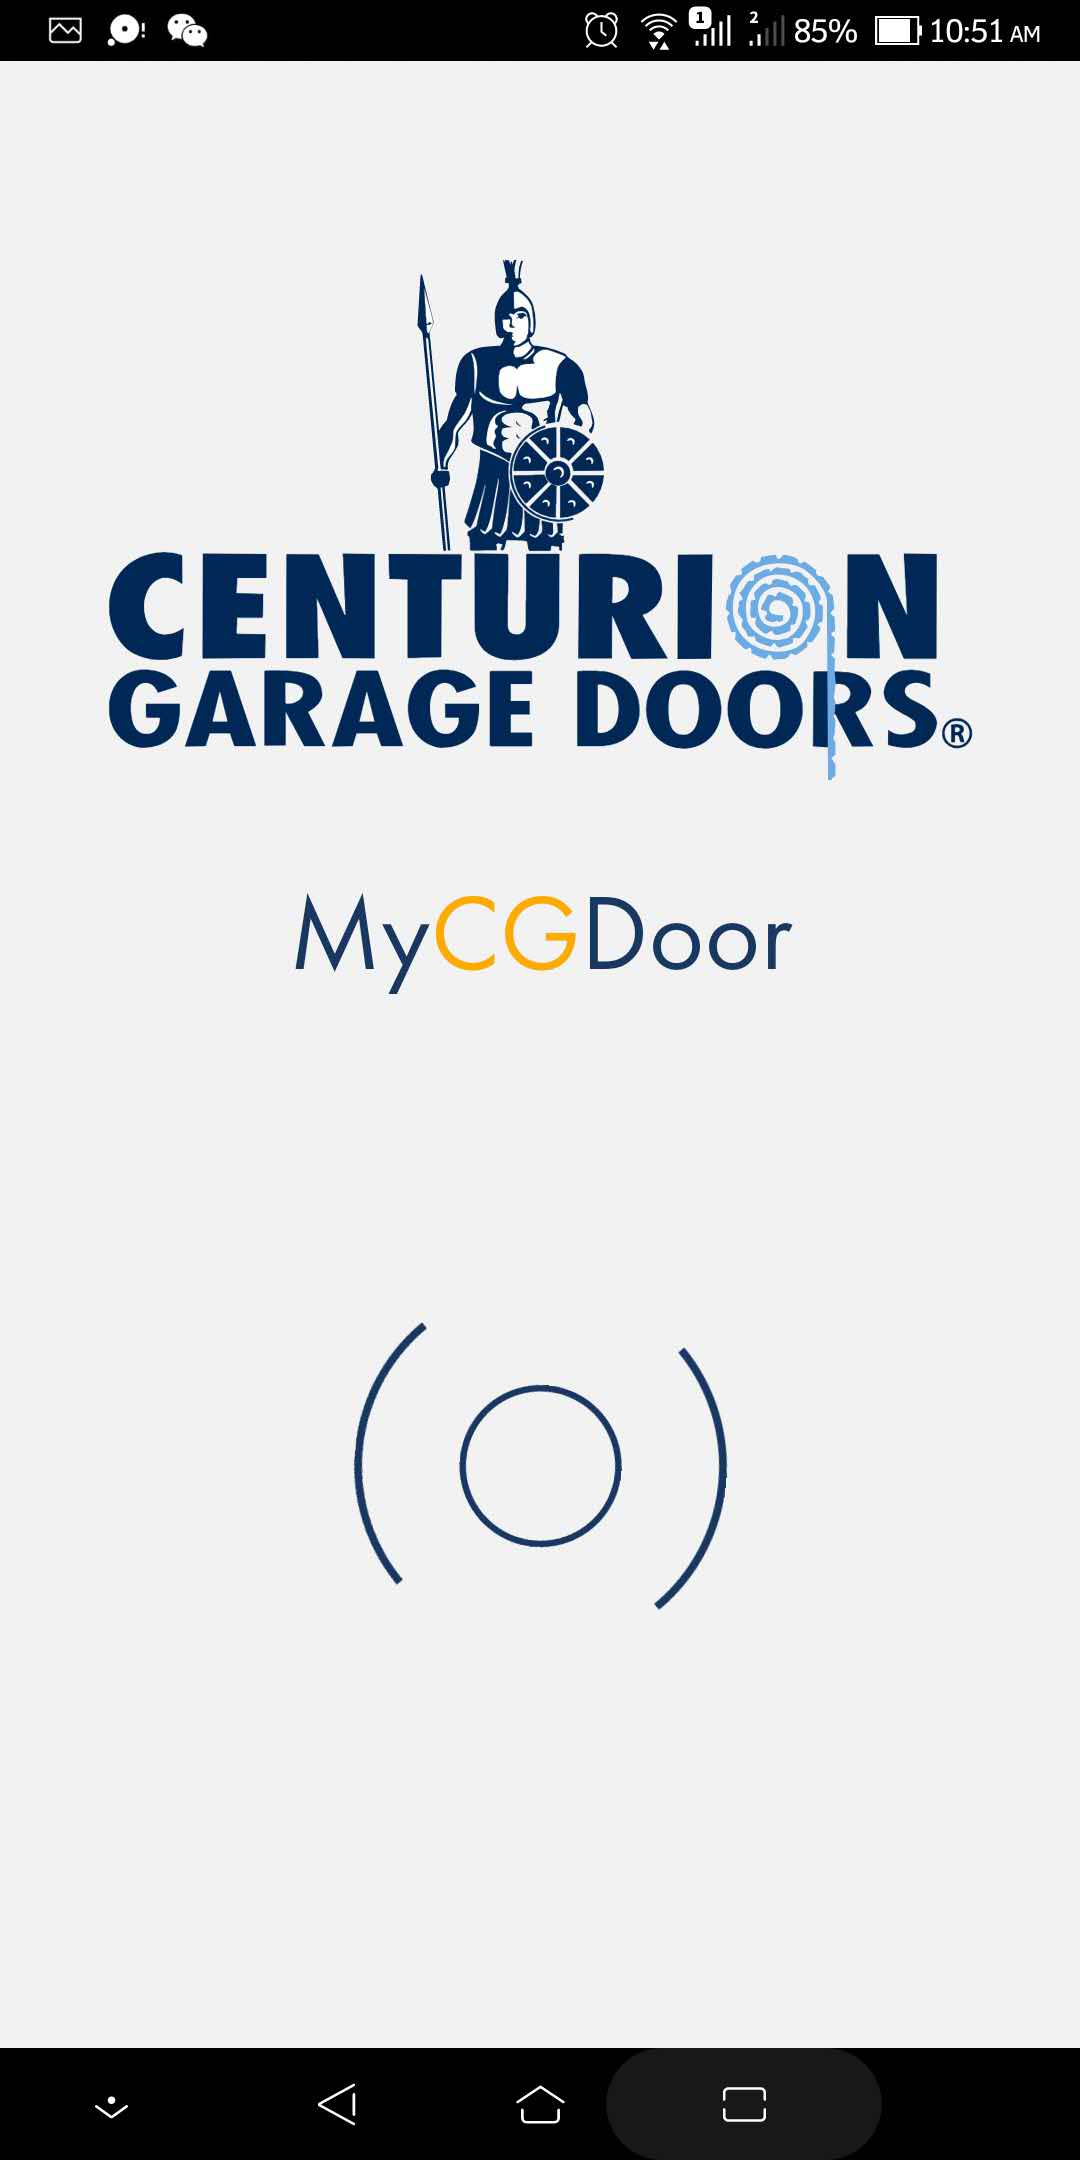 3 Garage Doors and Home Automation: The Rise of the Smart Garage